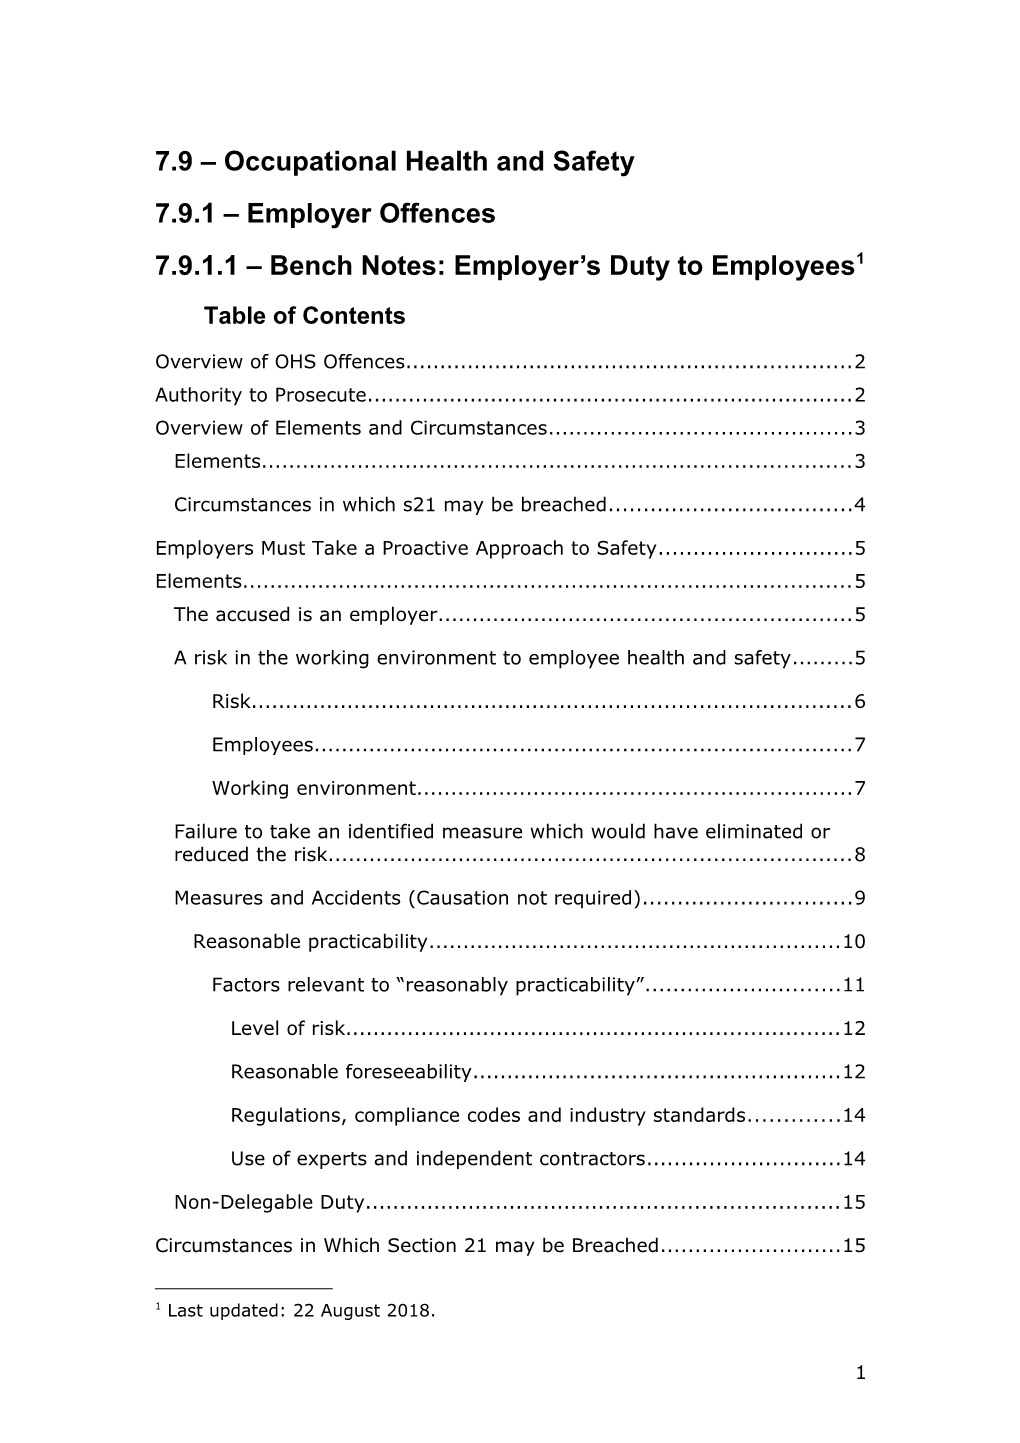 7.9 Occupational Health and Safety